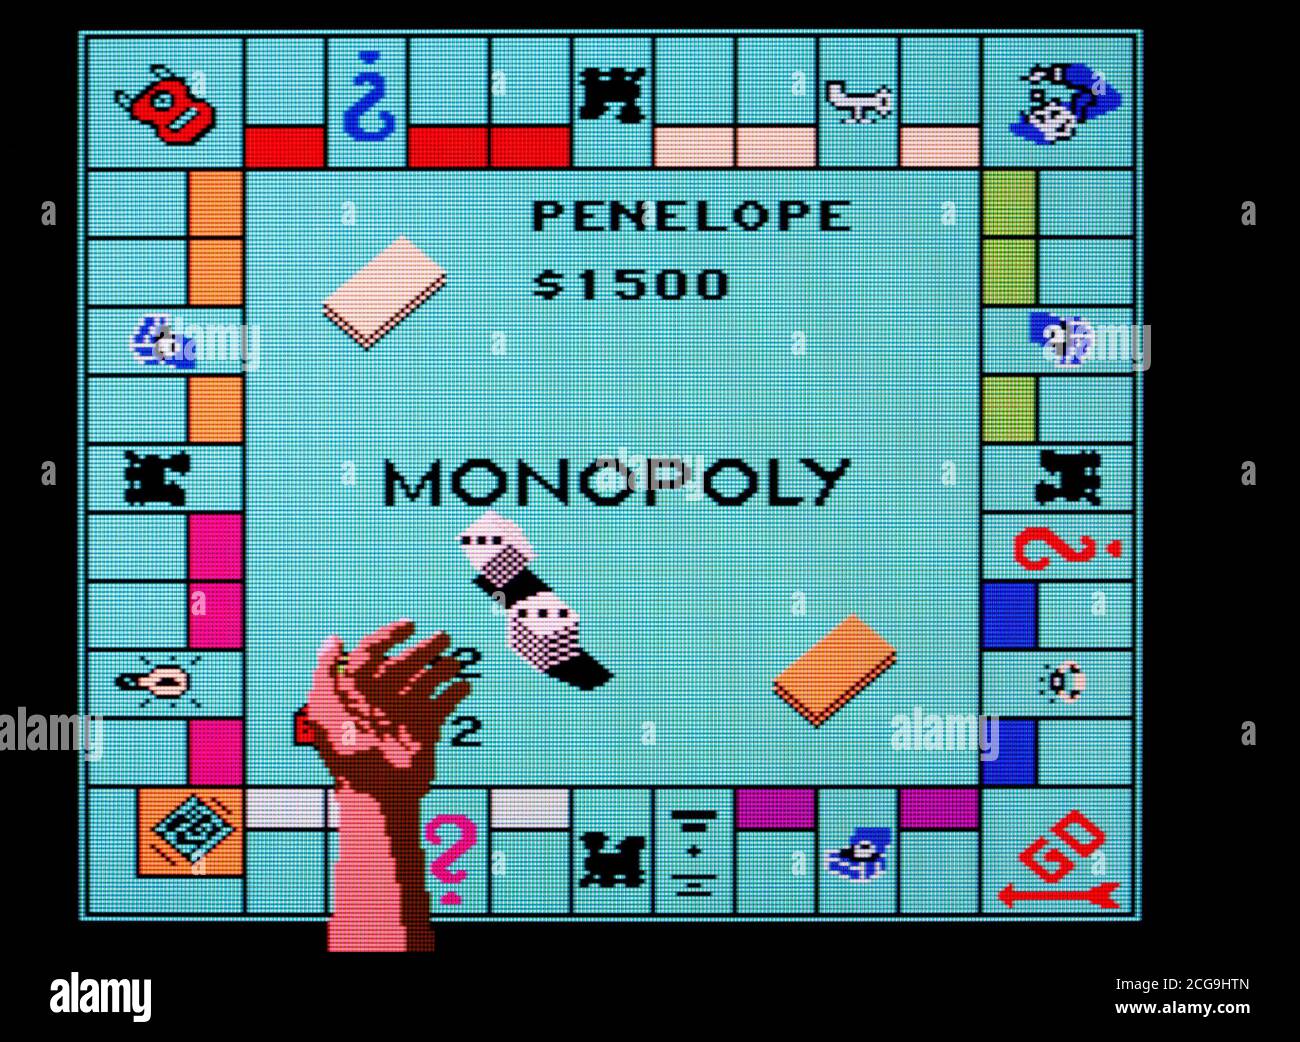 Monopoly - Nintendo Entertainment System - NES Videogame - Editorial use only Stock Photo